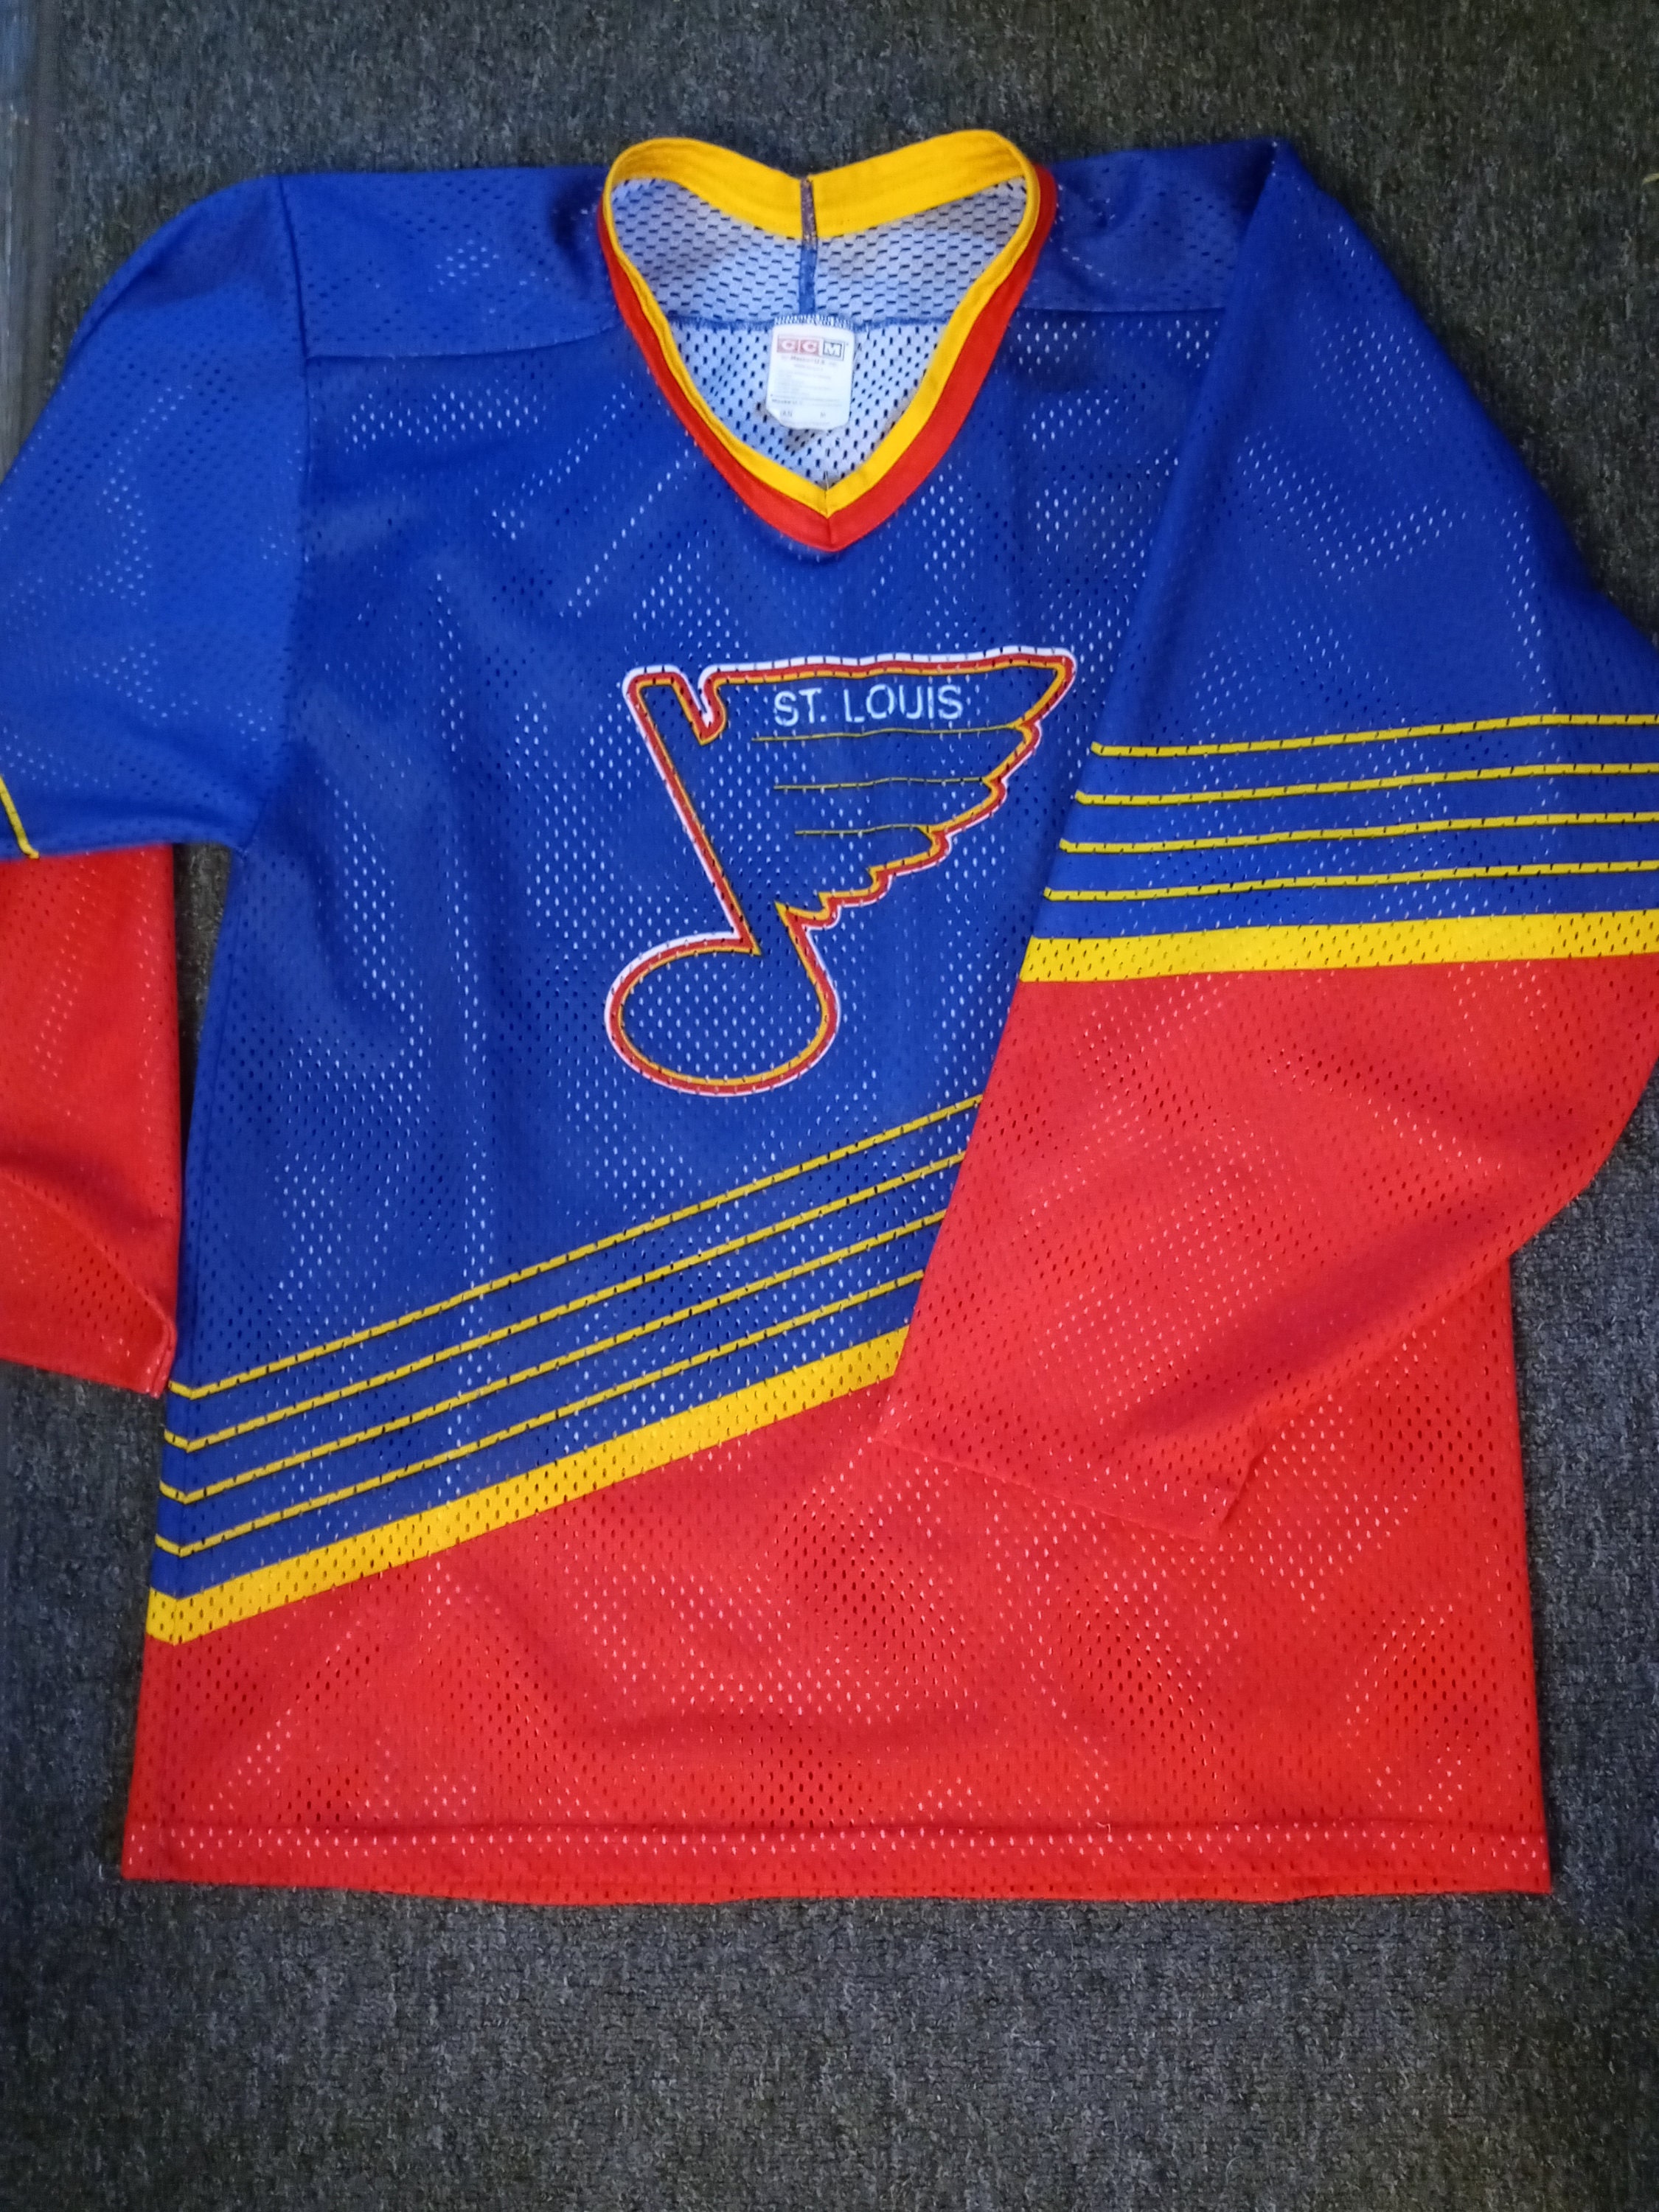 CCM Team Issued/used Washington Capitals NHL Practice Hockey Jersey 52 Blue 90’s